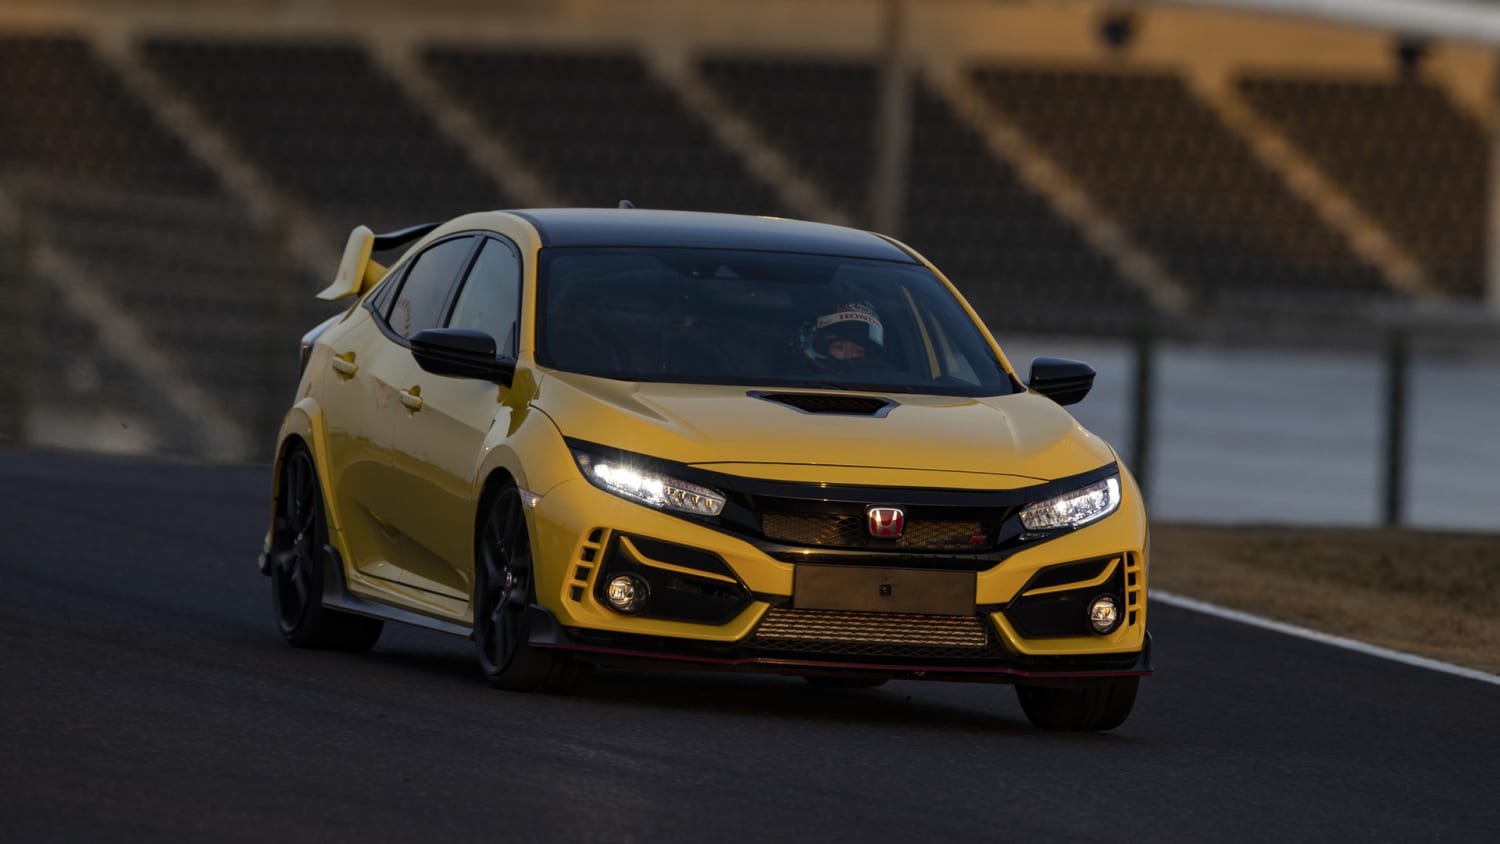 Next-Gen Honda Civic Type R Gets 395 Horsepower From Electric Rear Axle: Report